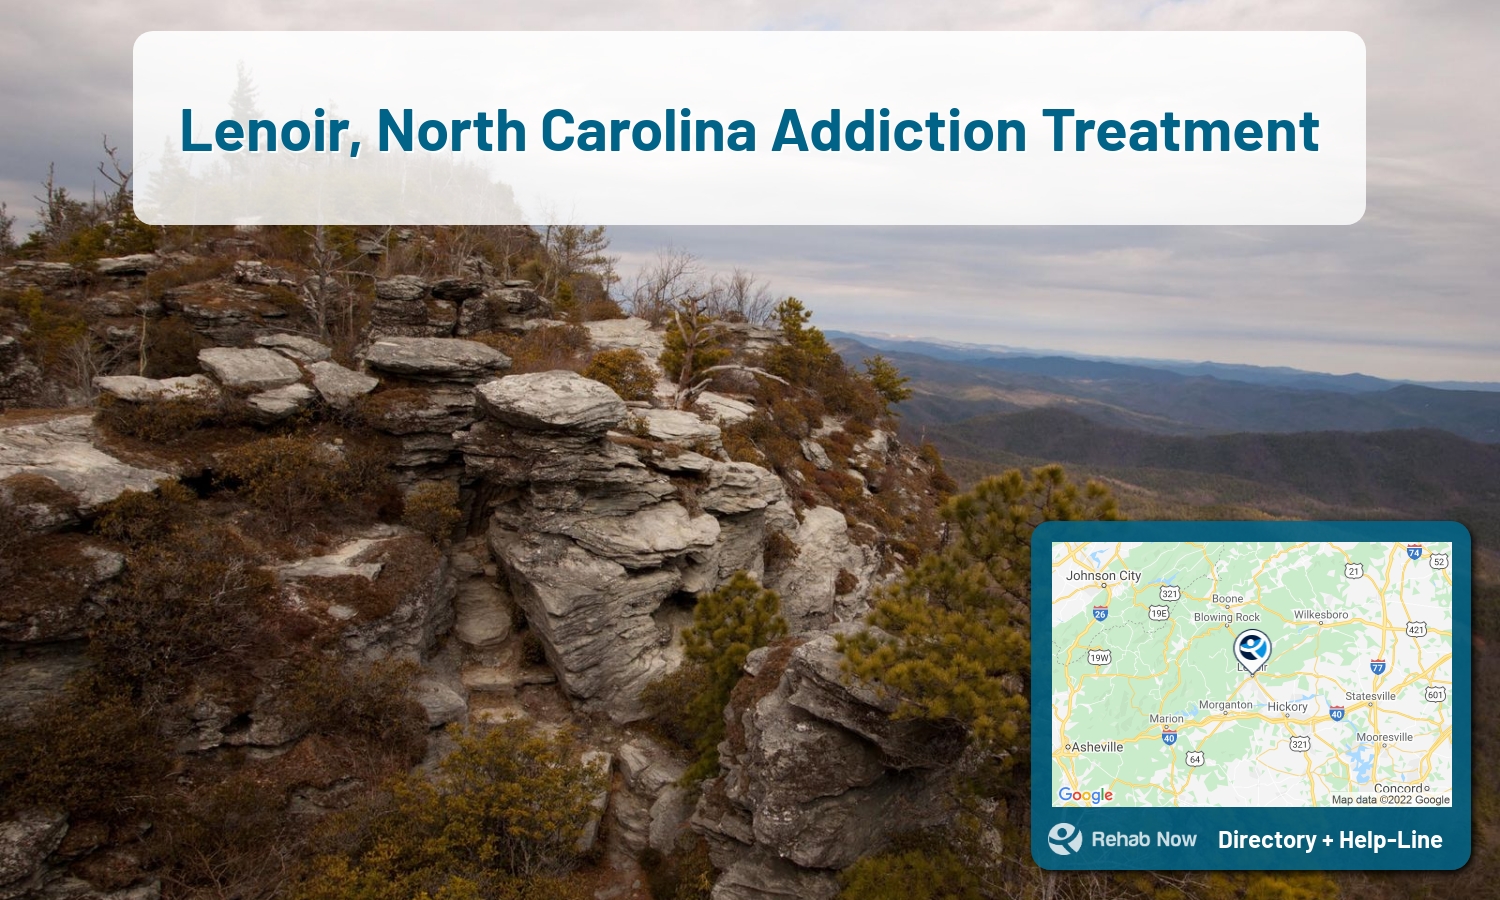 Lenoir, NC Treatment Centers. Find drug rehab in Lenoir, North Carolina, or detox and treatment programs. Get the right help now!